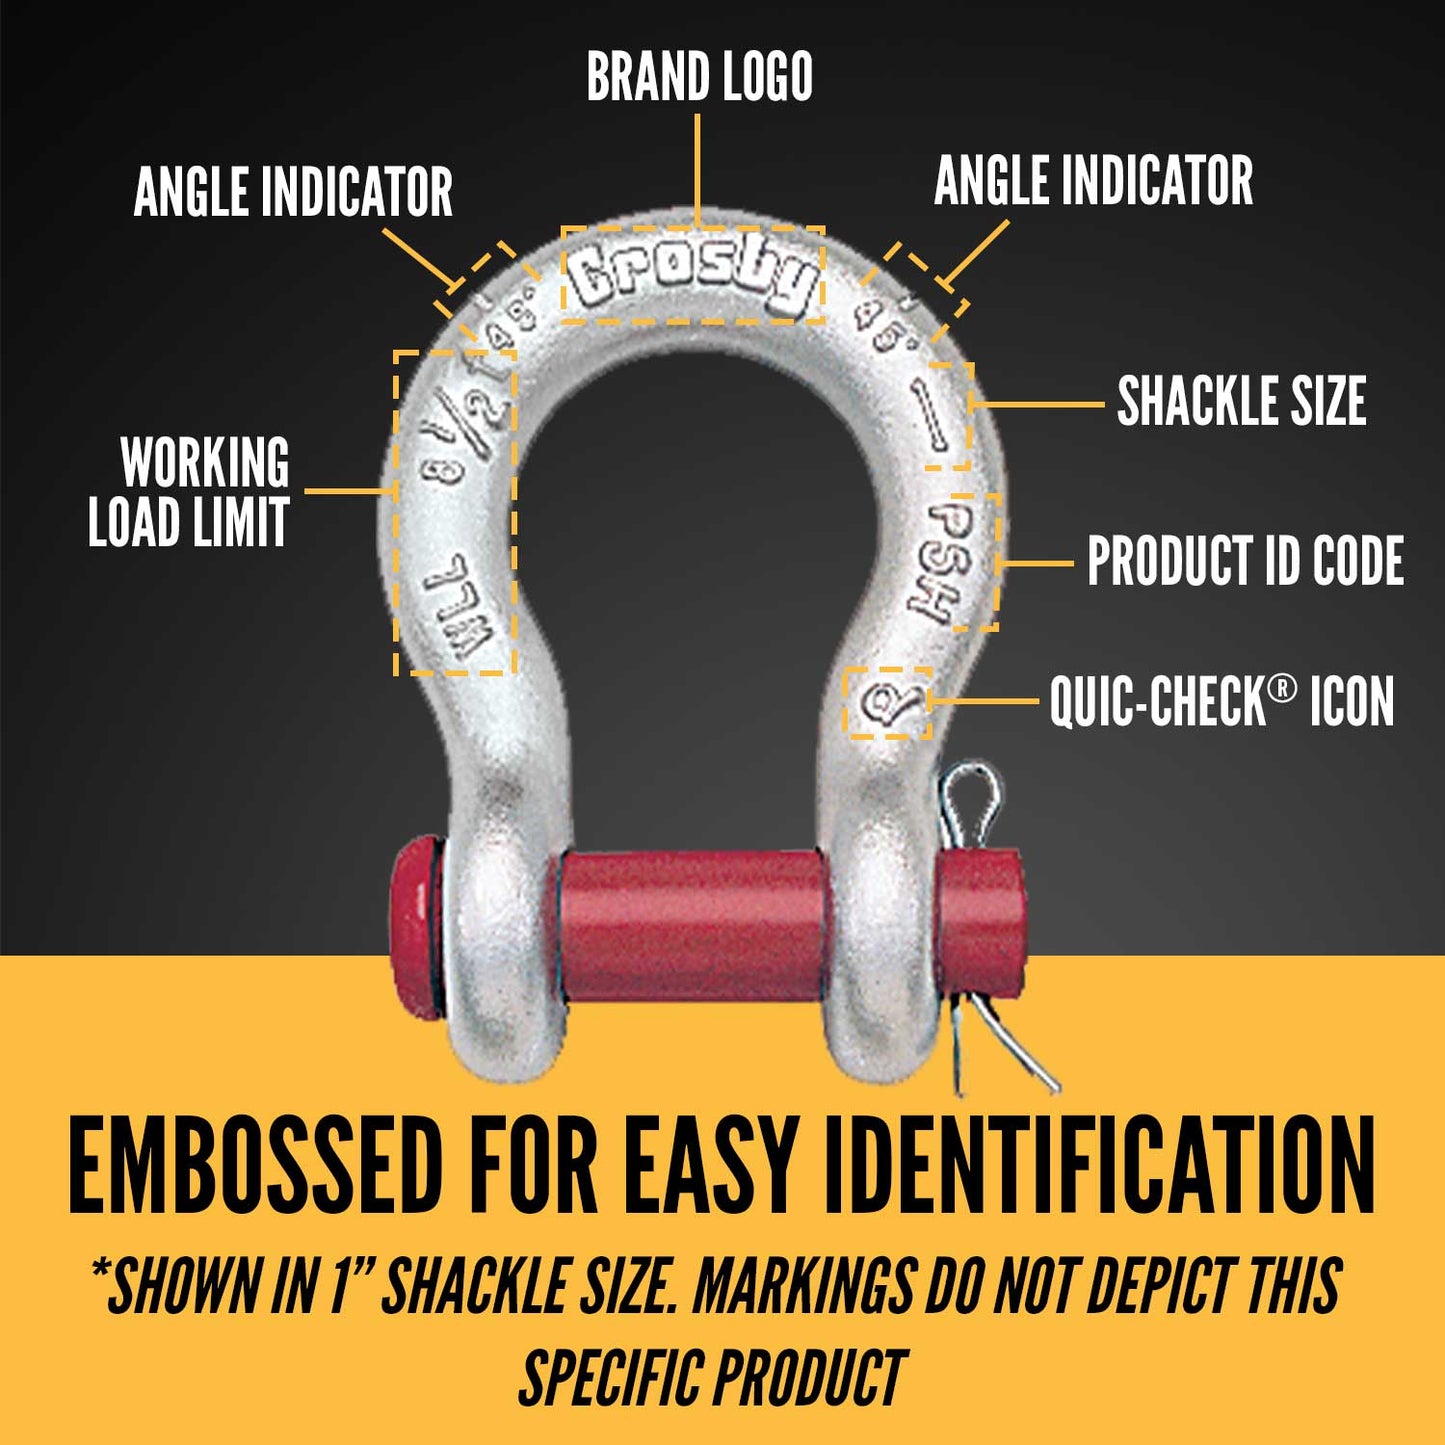 1/4" Crosby® Round Pin Anchor Shackle | G-213 - 0.5 Ton embossed for easy identification